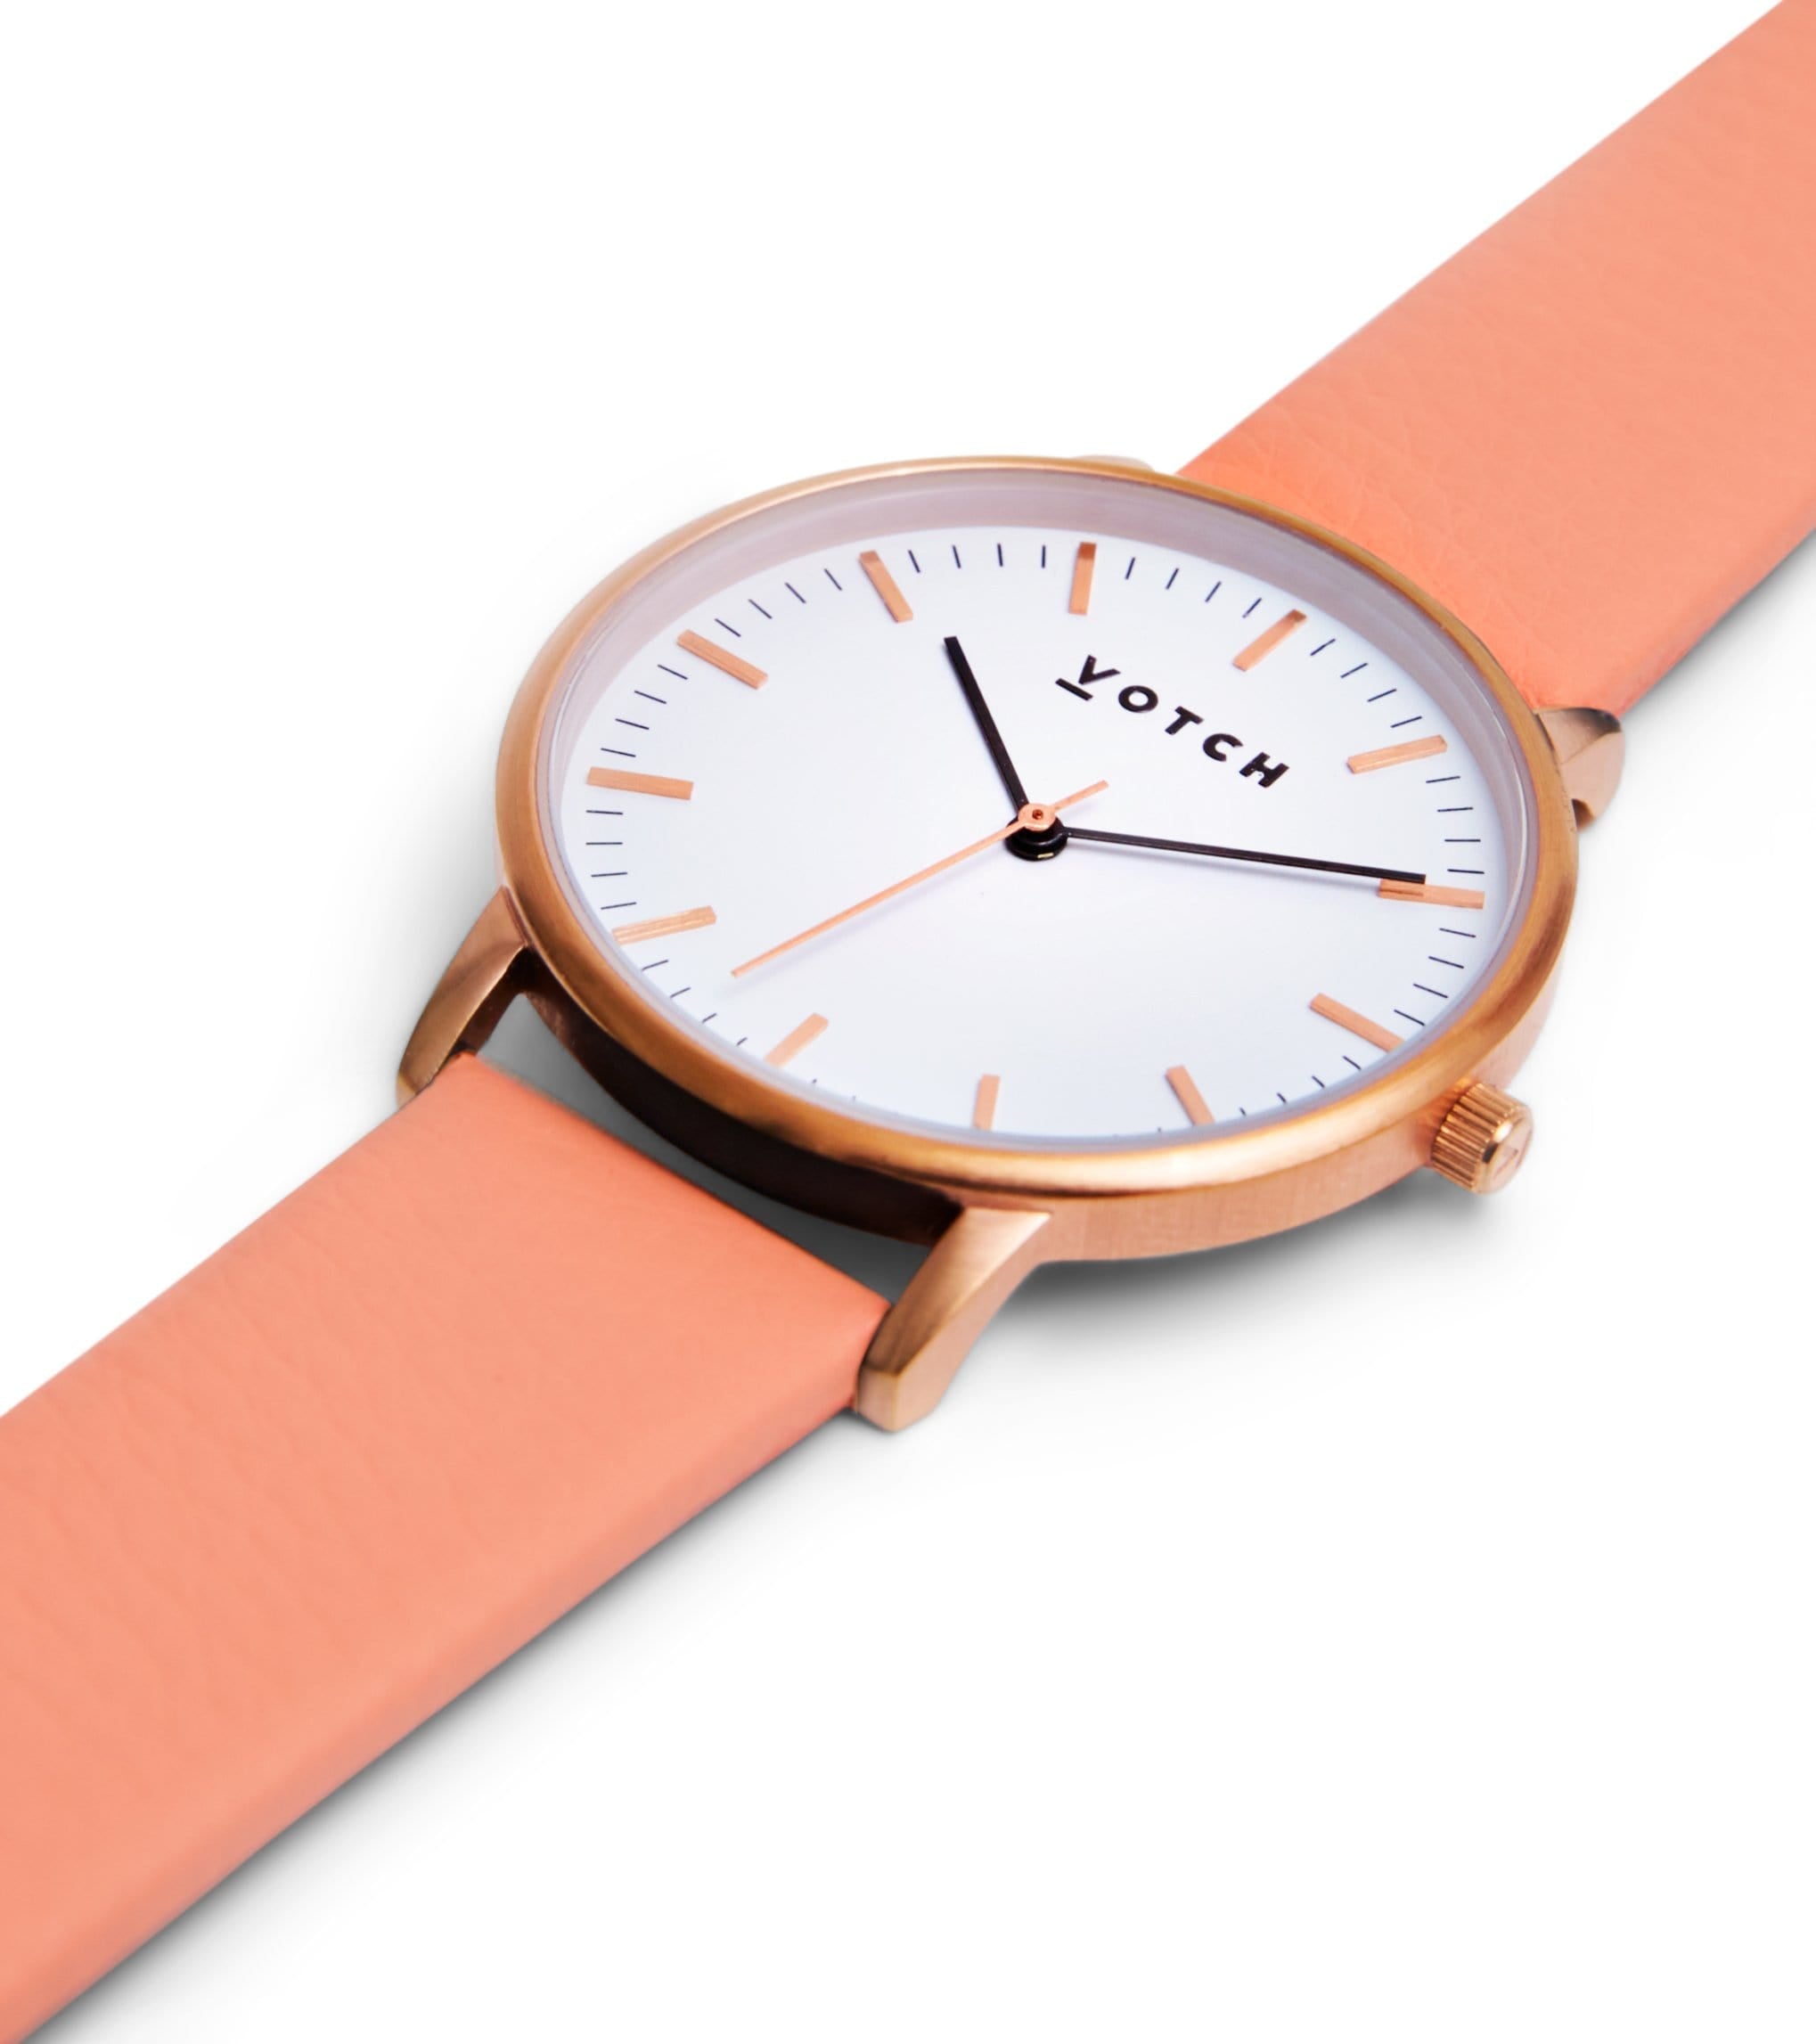 Votch_Watch_RoseGold_Coral_Moment_Side.jpg